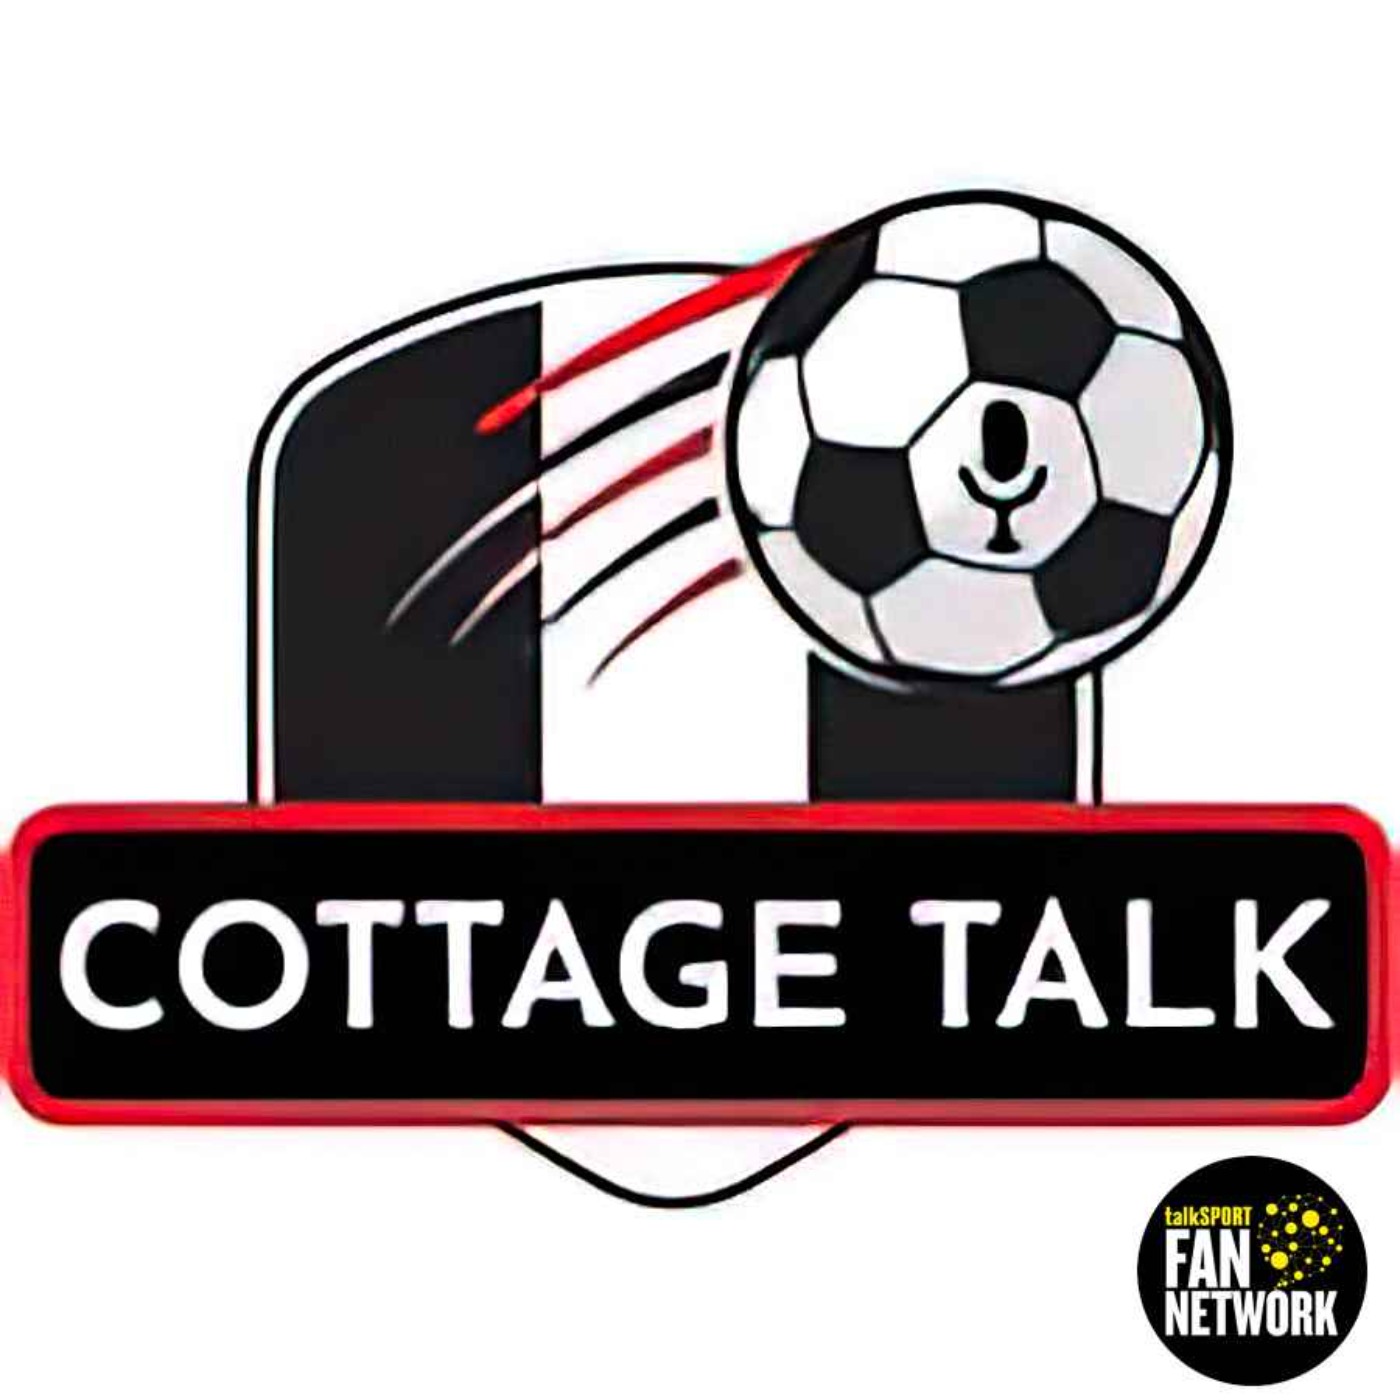 Cottage Talk Preview: Keys To Victory For Fulham Against Brighton & Hove Albion